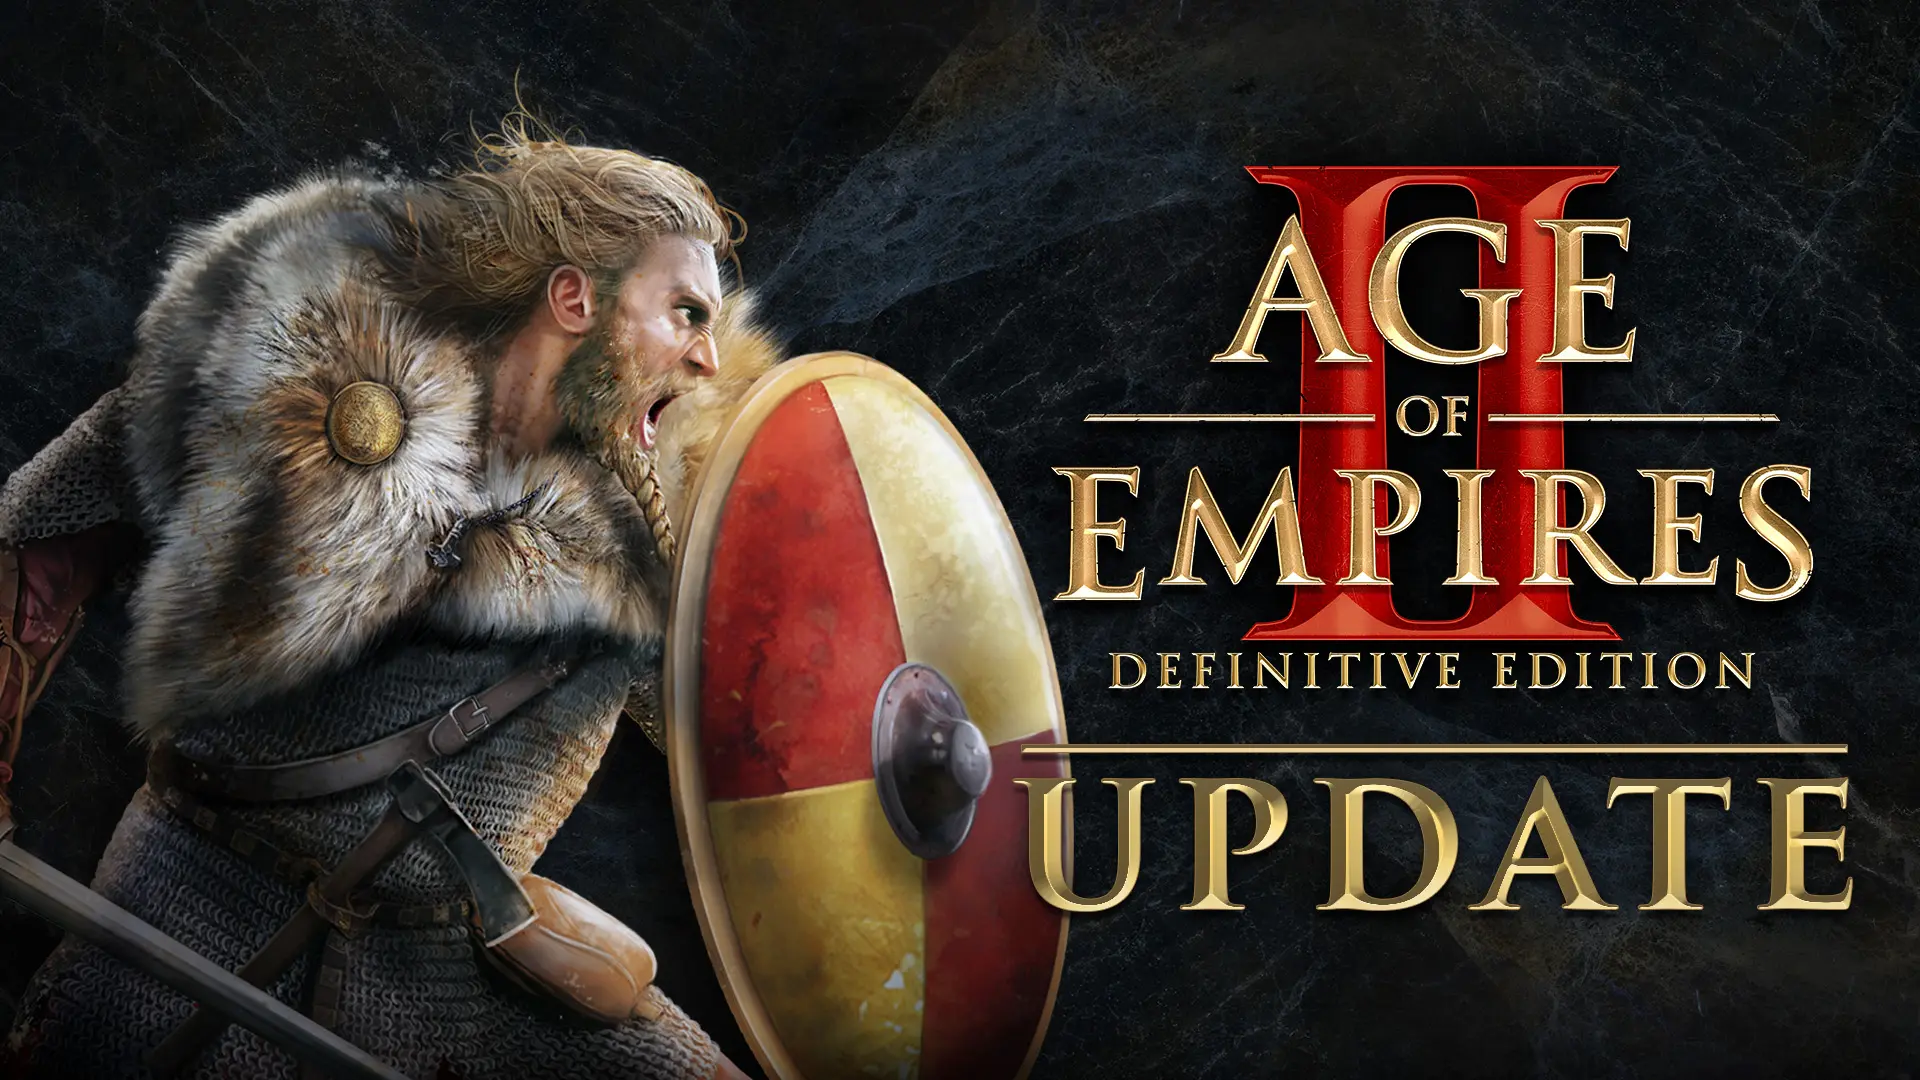 Age of Empires II: Definitive Edition - Update 107882 - Age of Empires